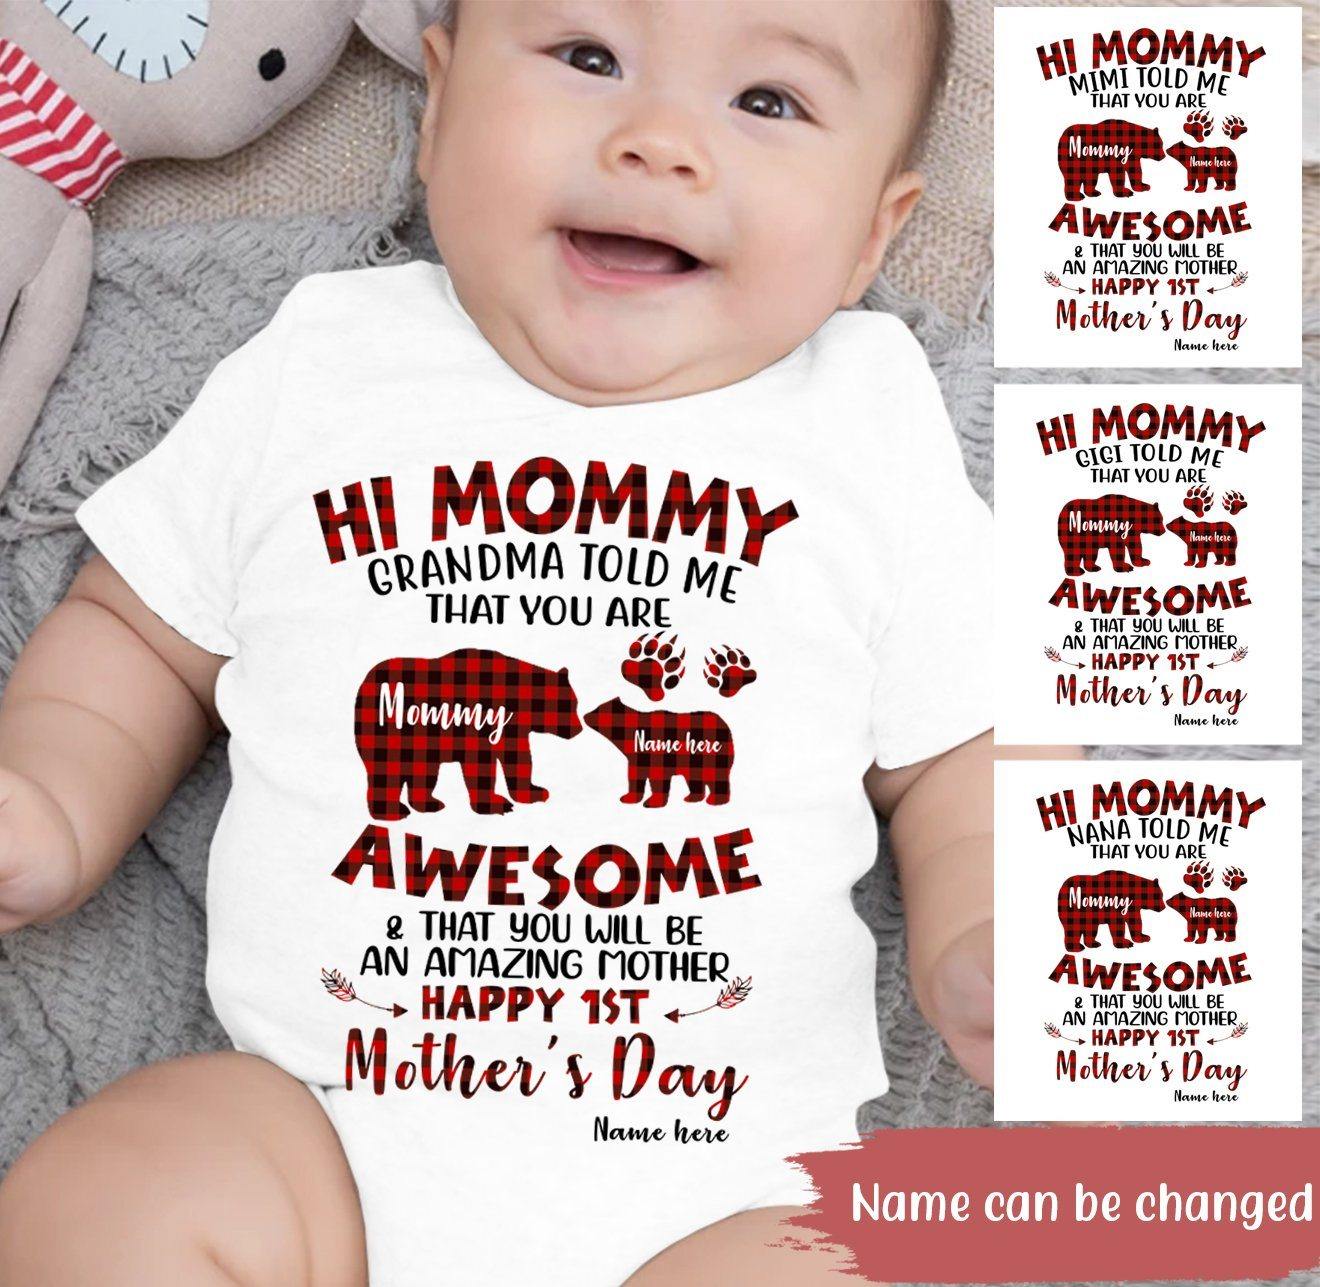 New Mom Custom Baby Onesie Grandma Told Me You Are Awesome Happy 1st Mother's Day Personalized Gift - PERSONAL84